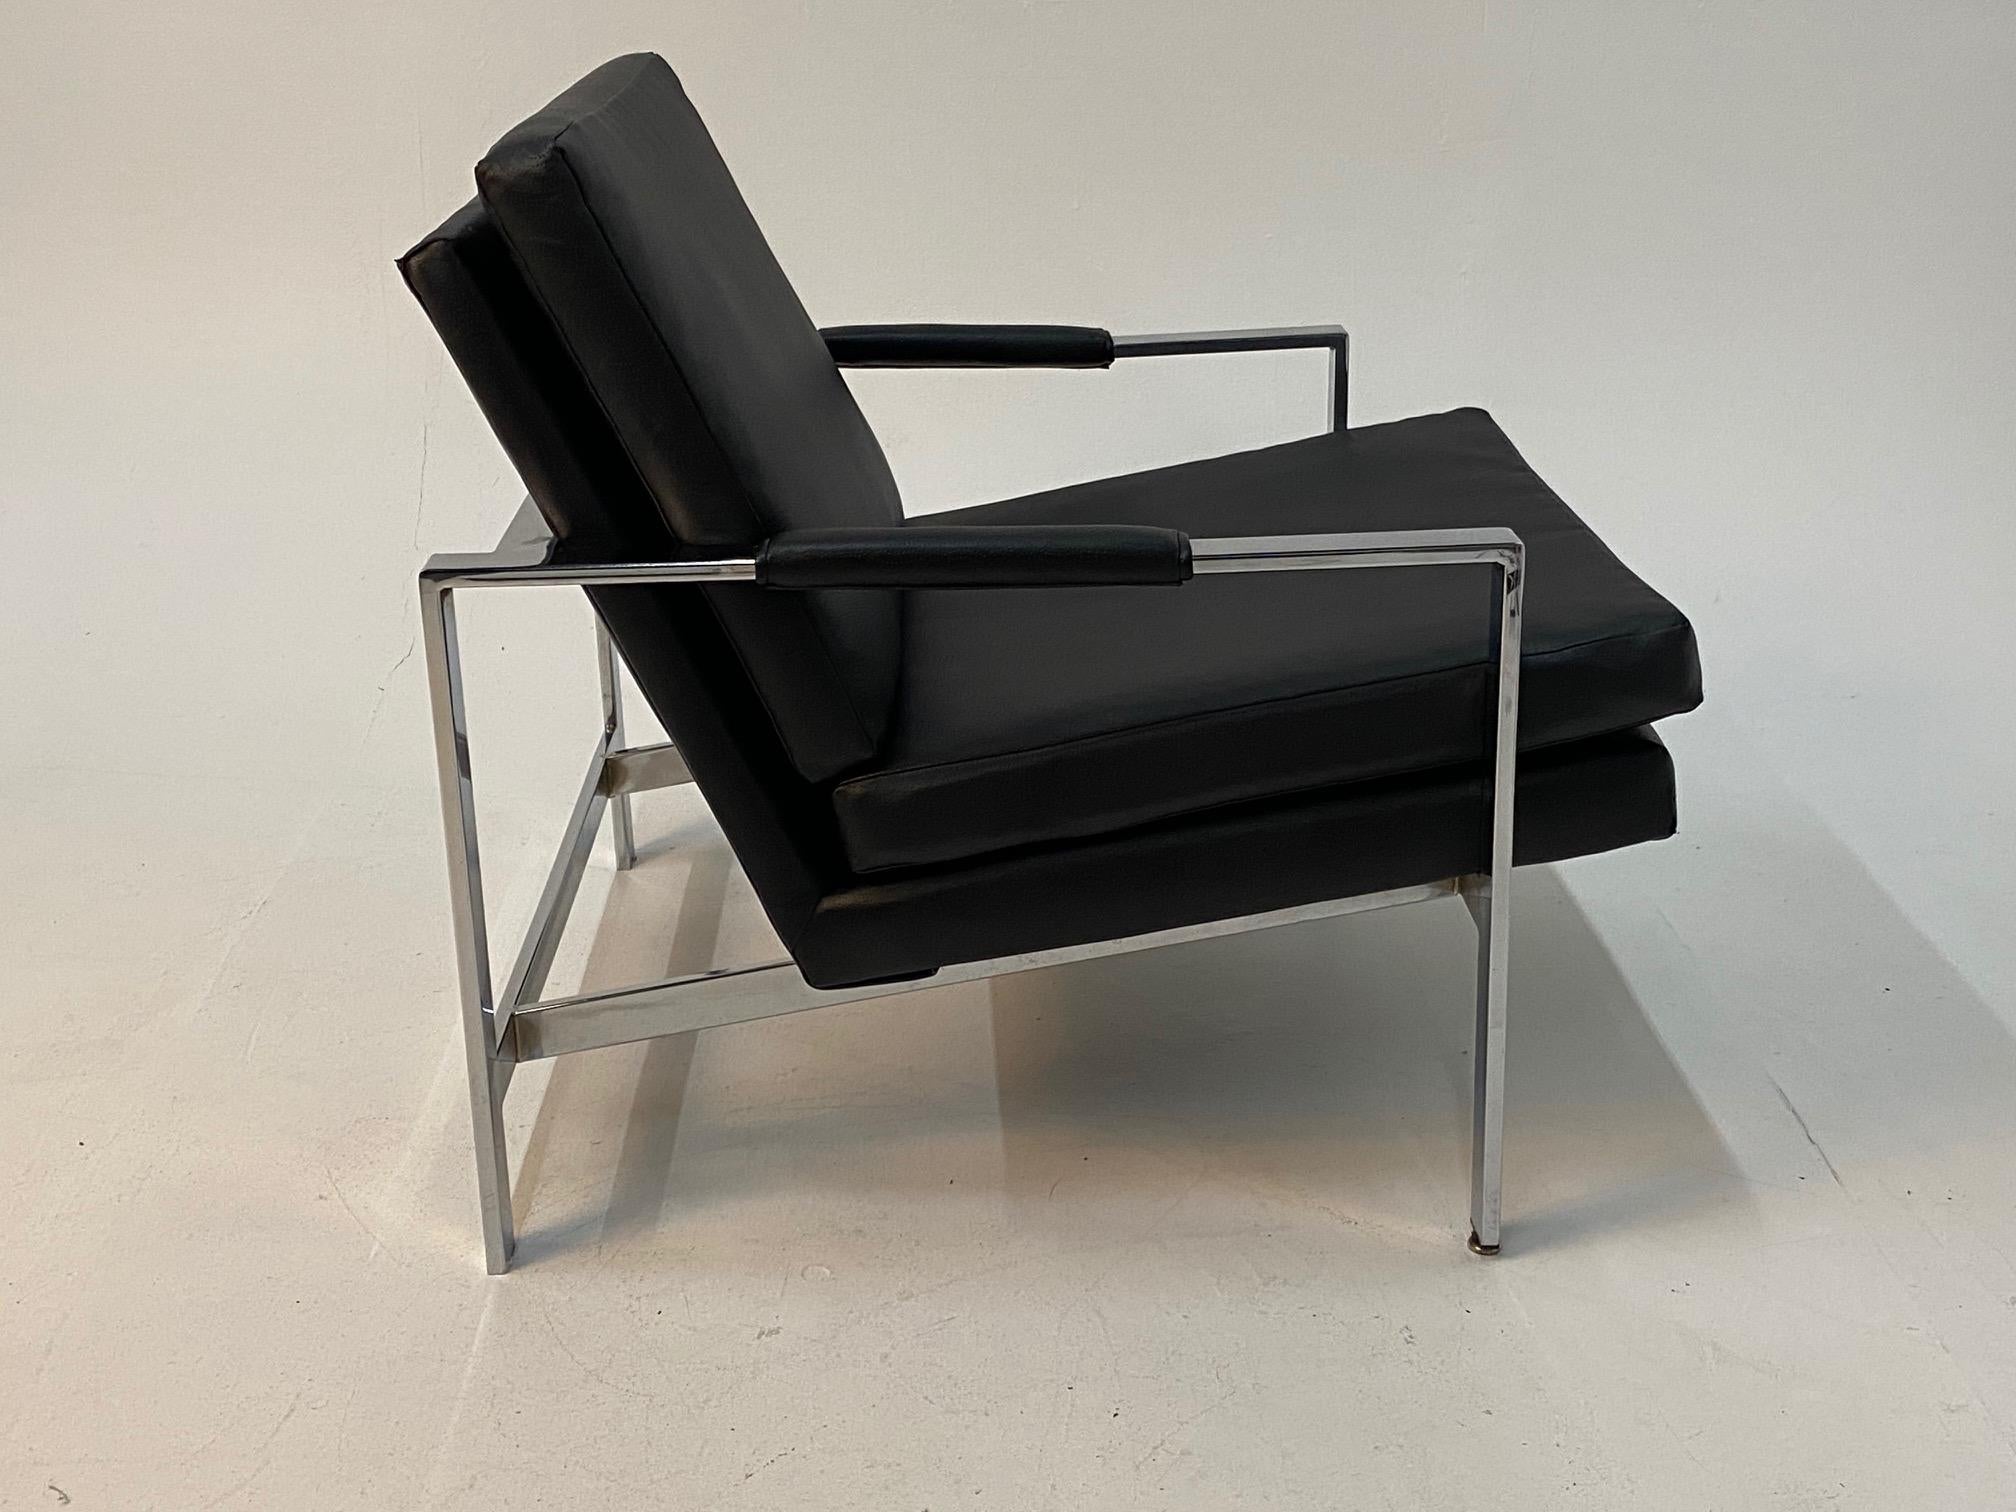 A sophisticated pair of chrome and black vinyl arm chairs  that exude mid century modern class.  No markings, but sure look like Milo Baughman.   Vinyl showing some cracking.
Measure: arm height 19.